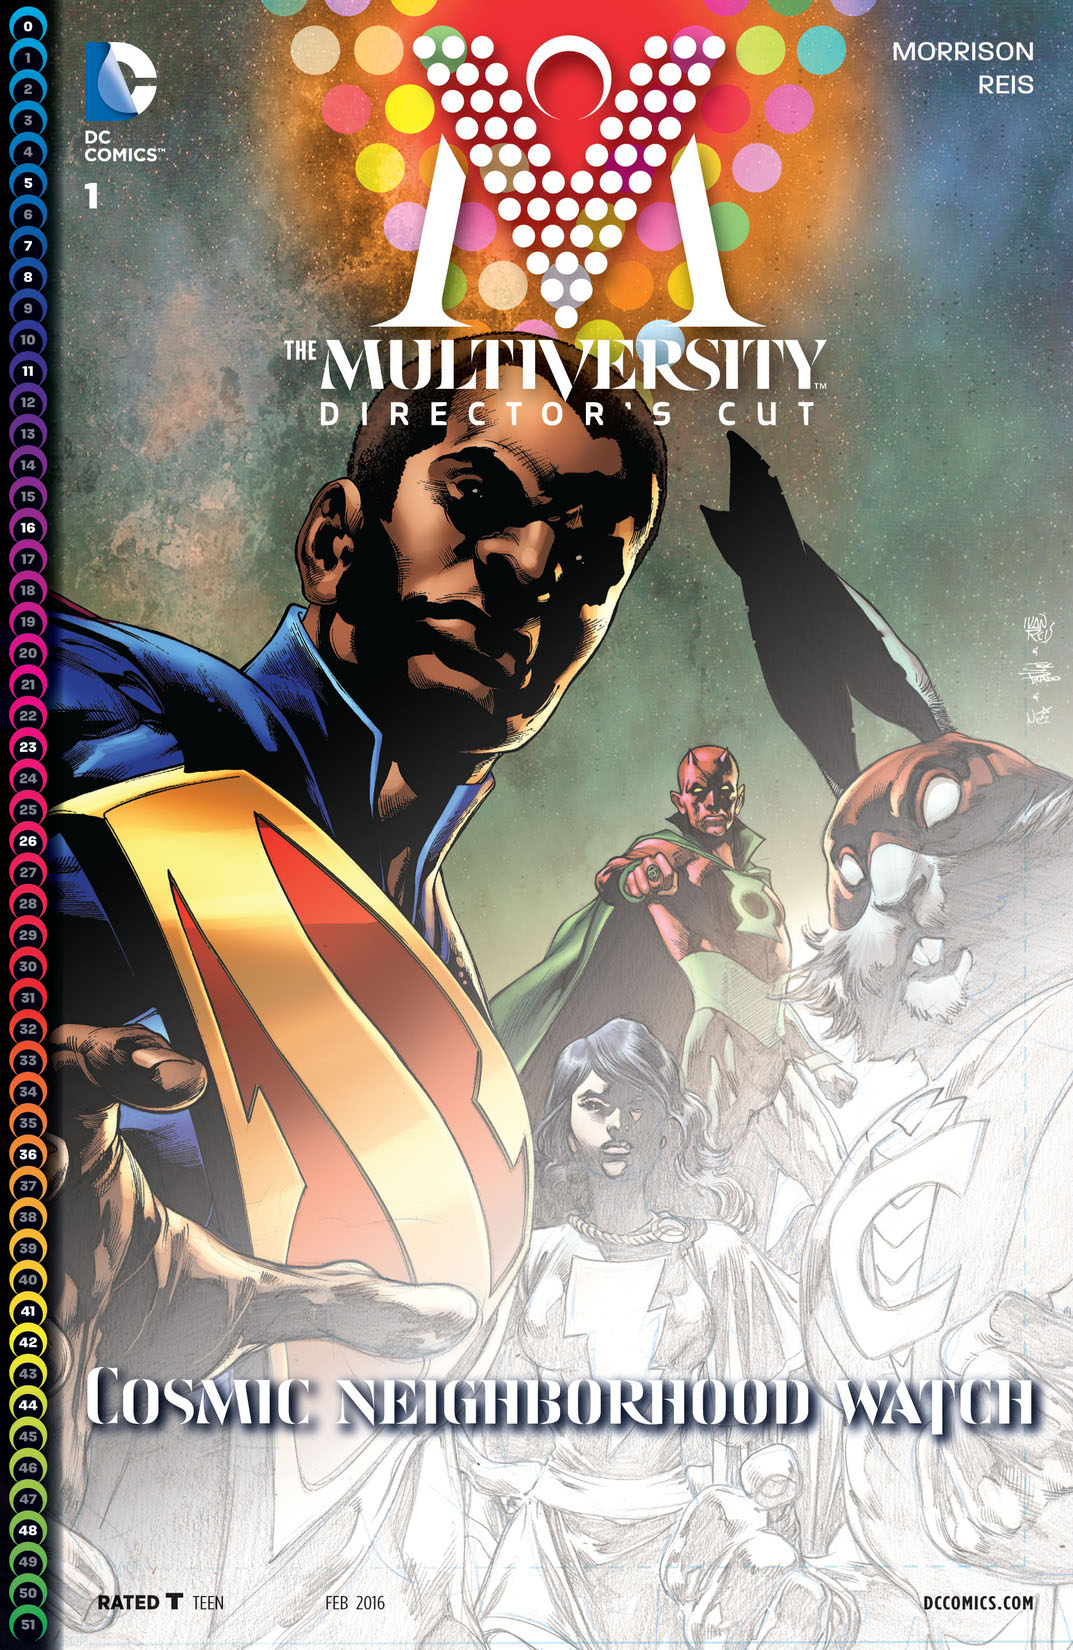 The Multiversity #1 & 2 Director's Cut #1 preview images